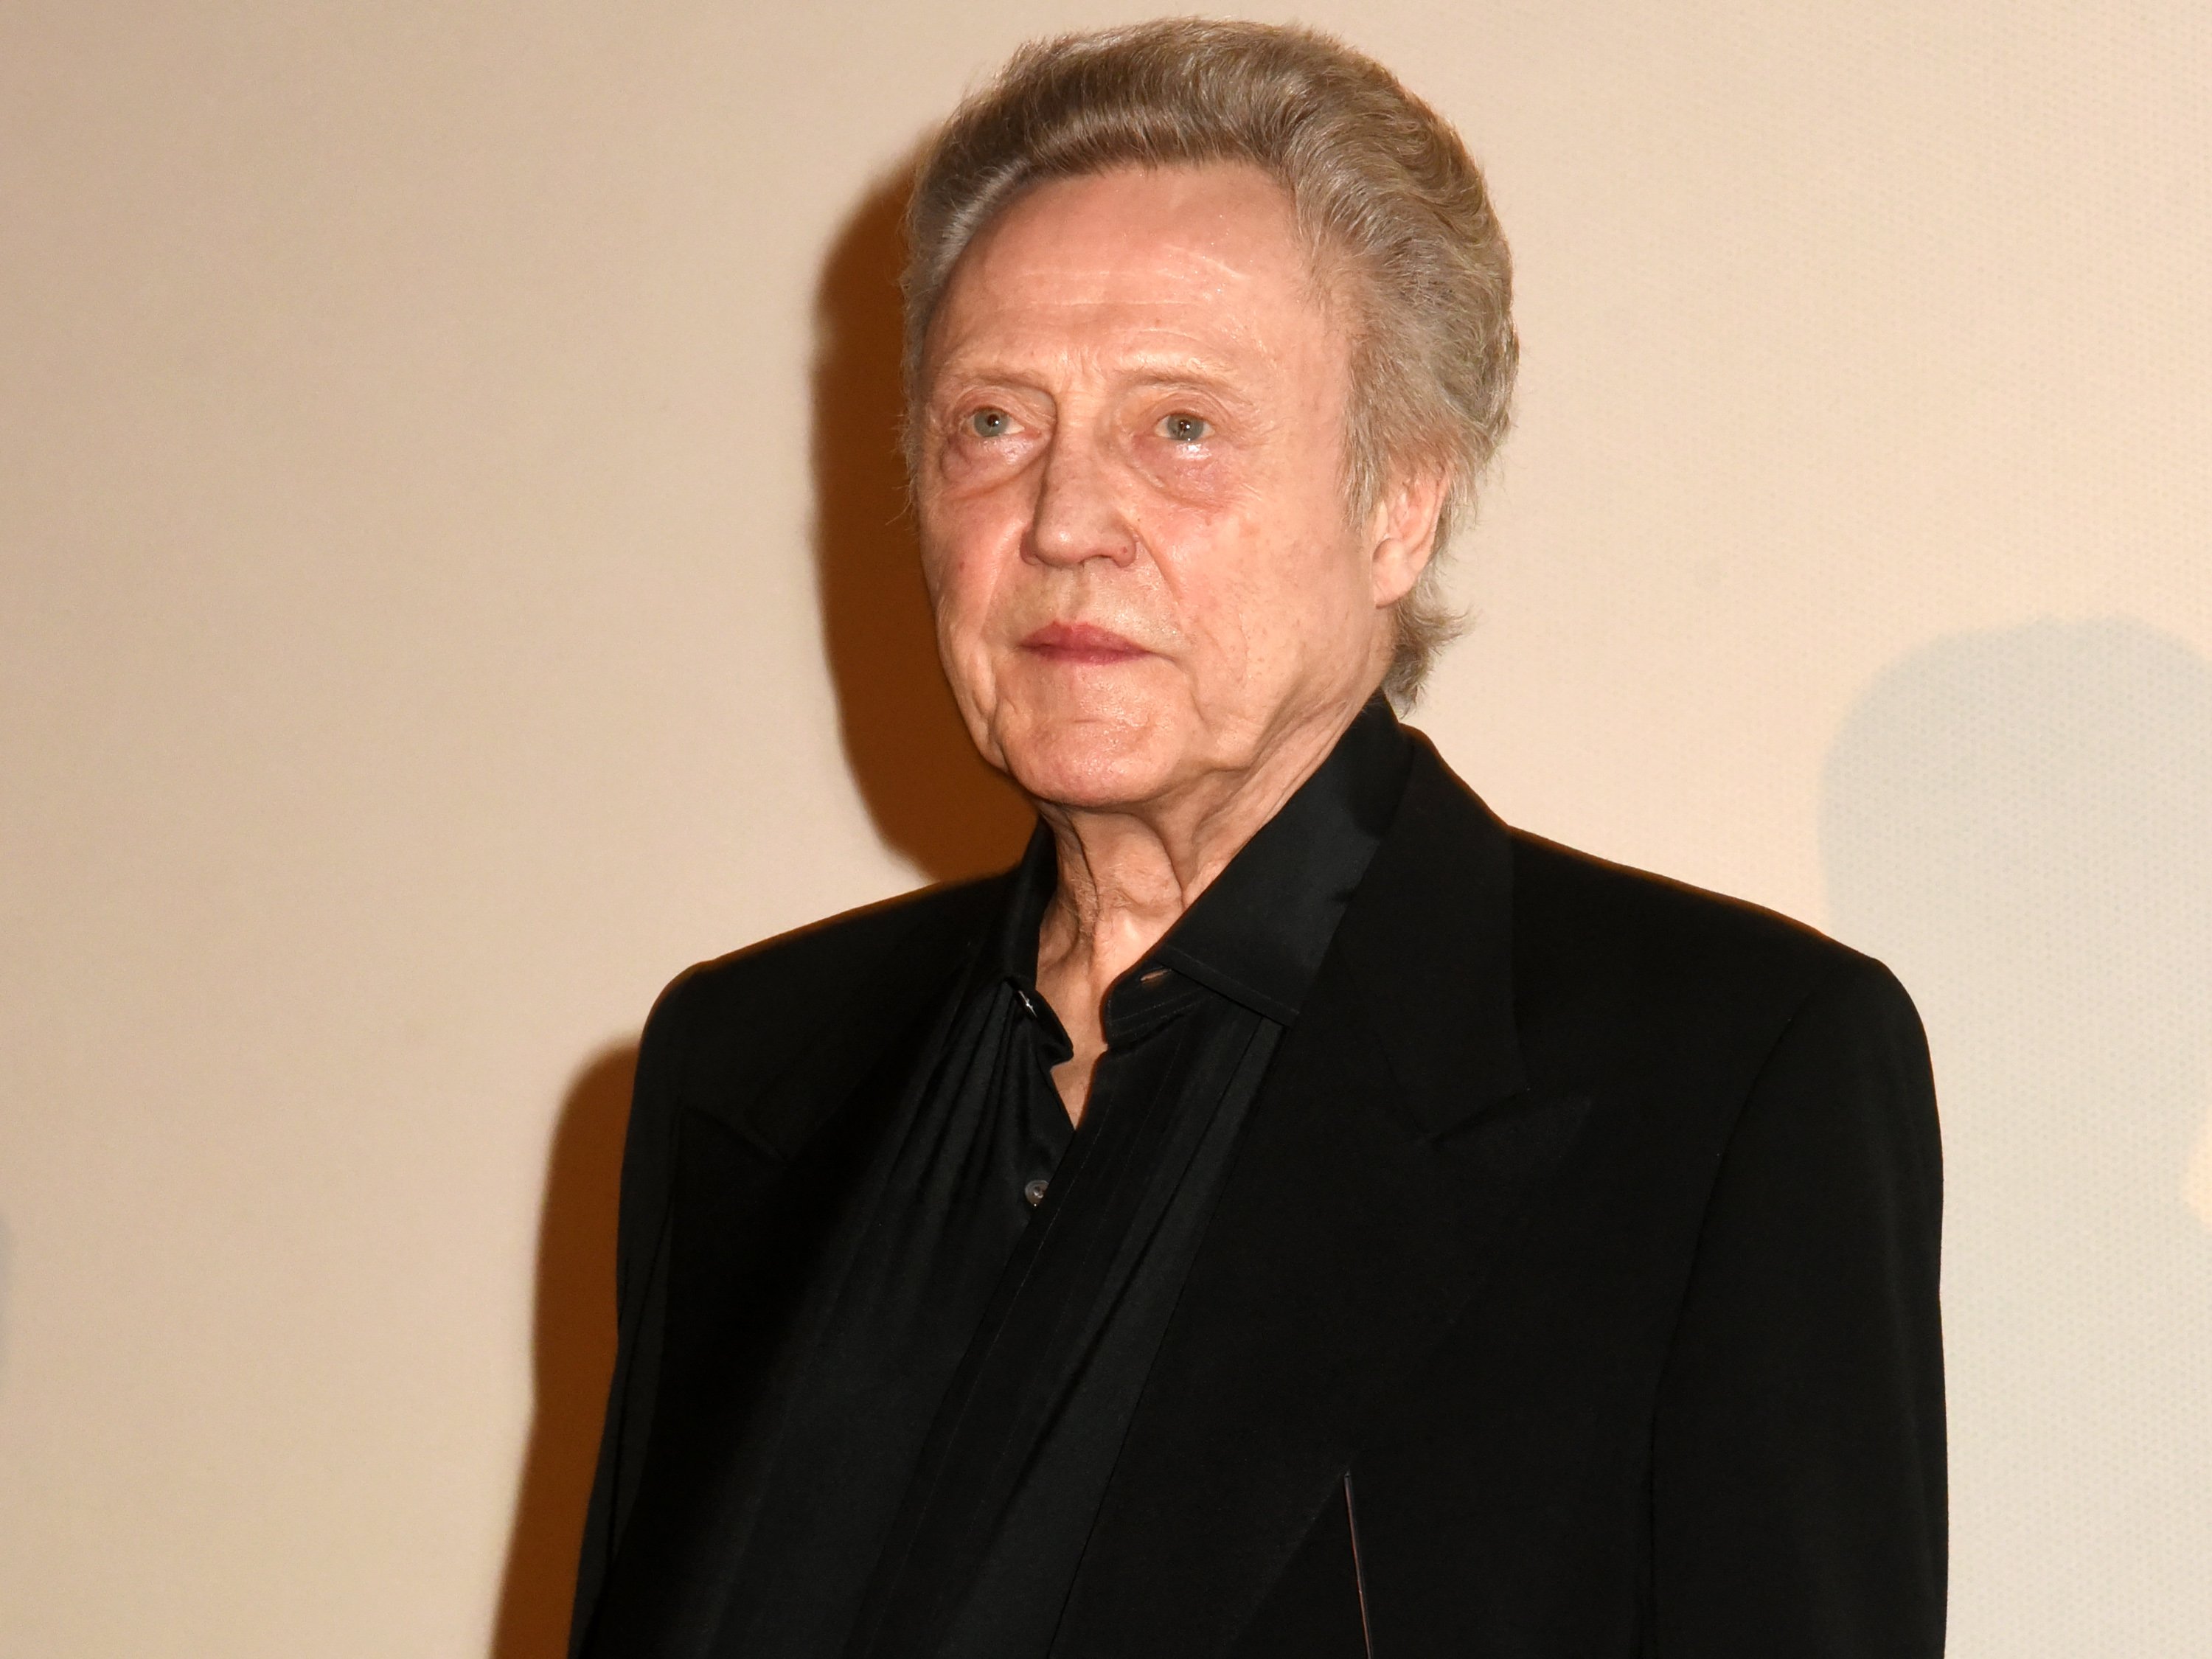 Christopher Walken at the screening of "Heaven’s Gate" on June 23, 2019 | Source: Getty Images